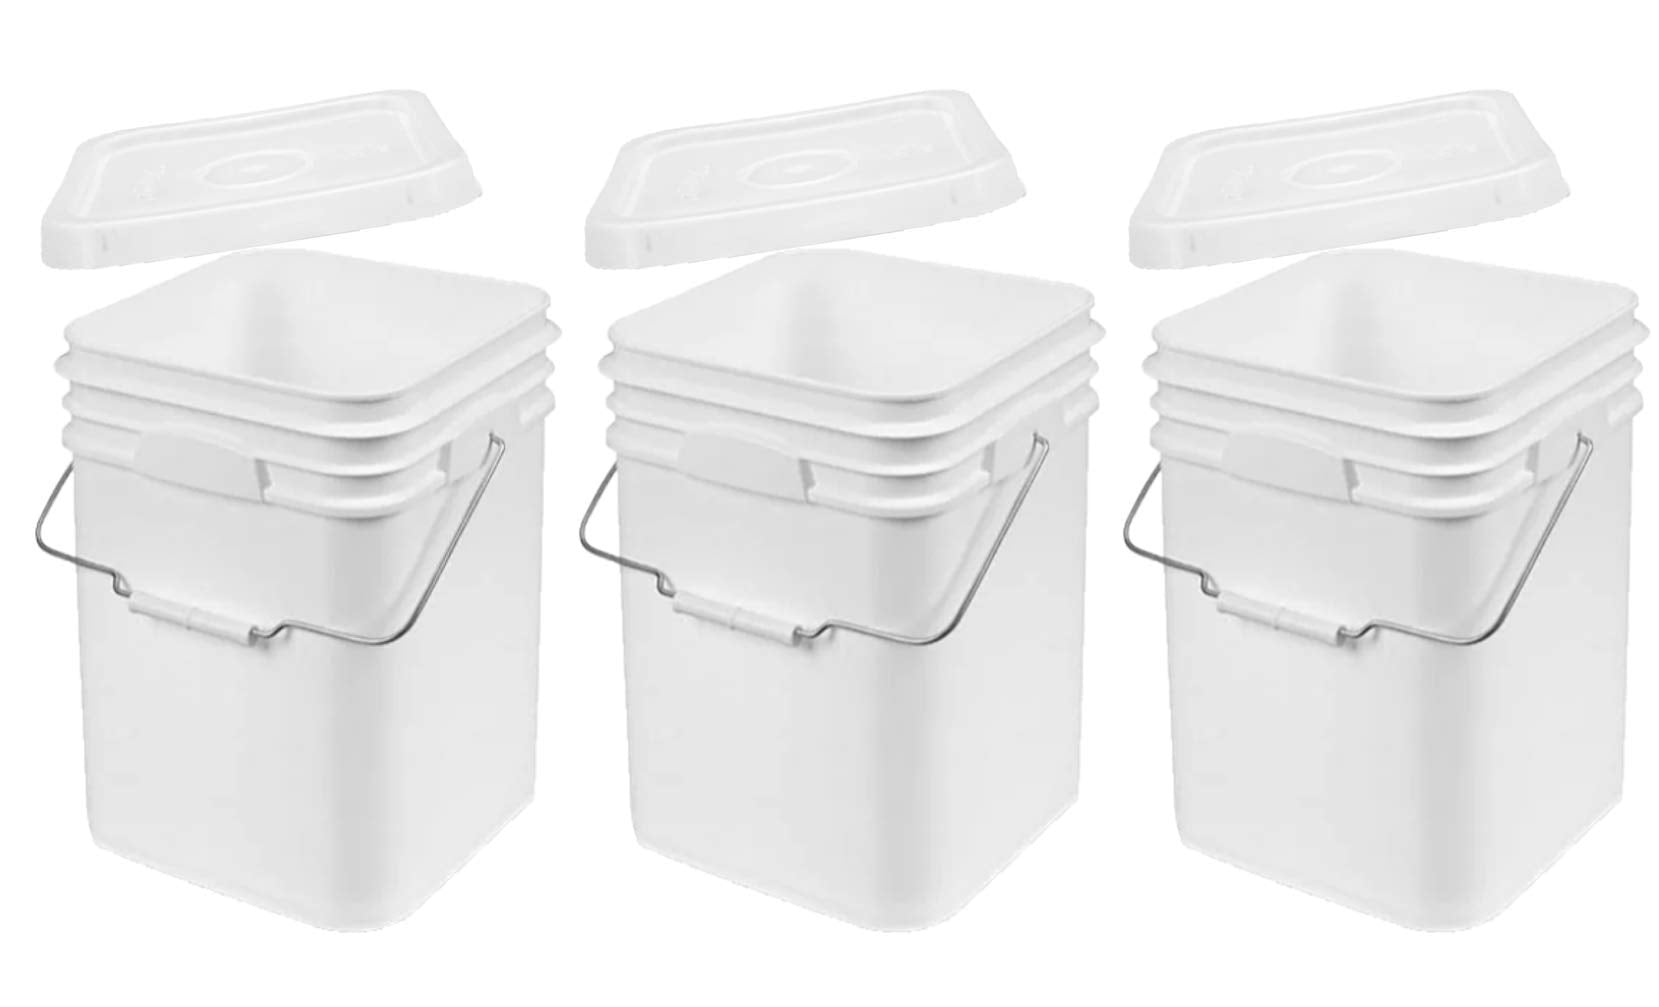 Terra Products Co. White Pails and Lids - Heavy Duty Buckets for Storage - Economical, Durable and Easy to Use (4Gallon 3Pack)